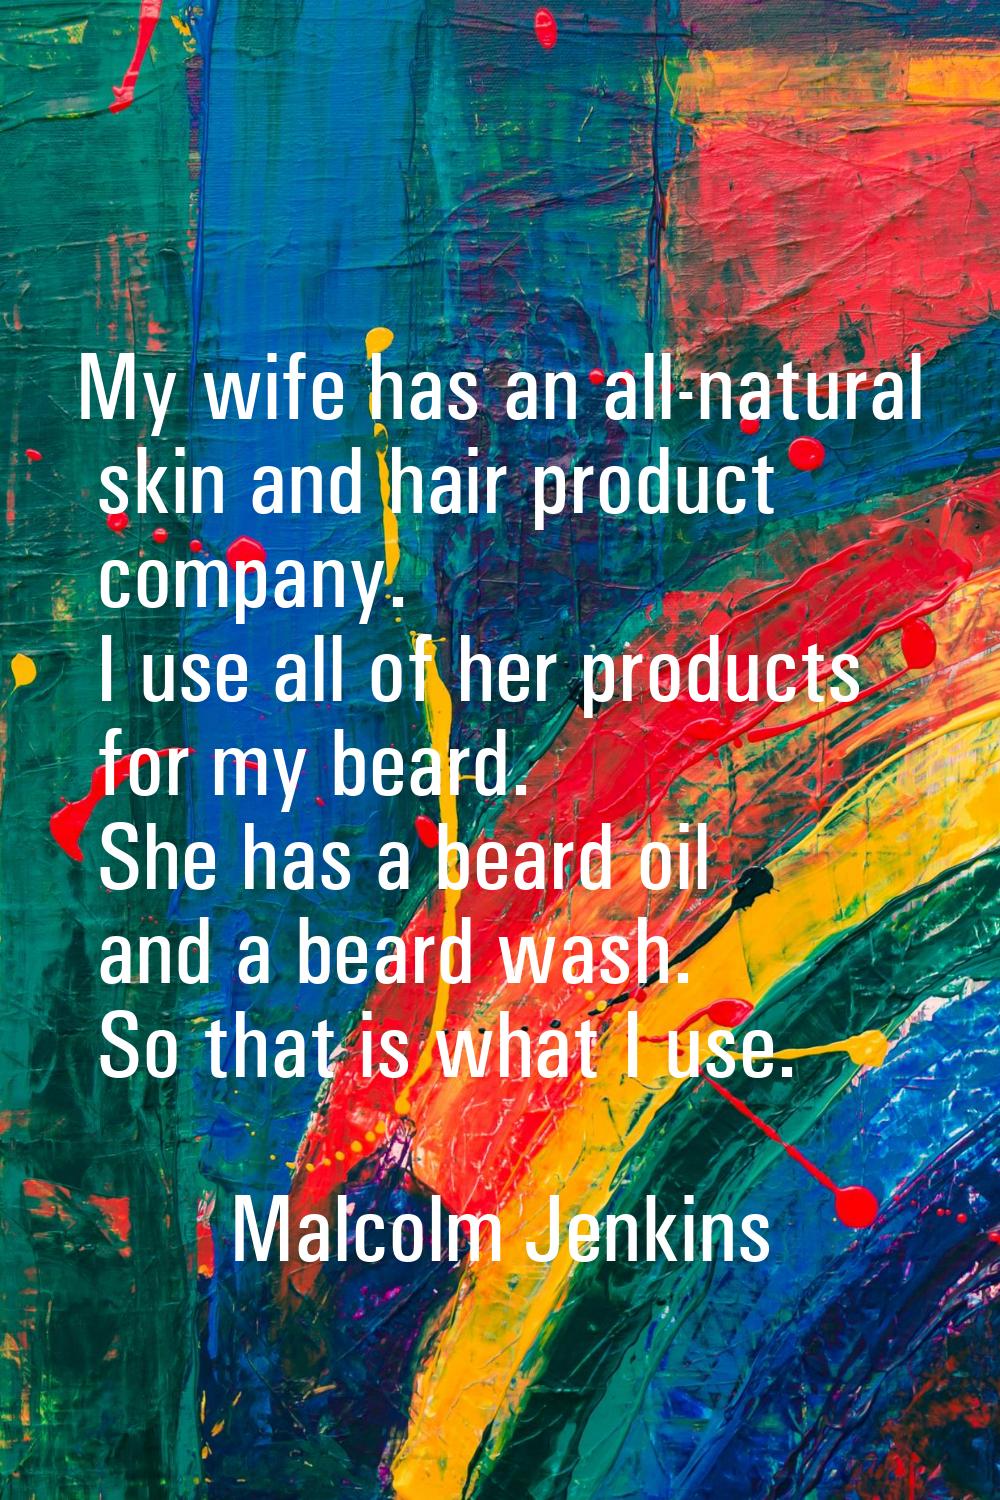 My wife has an all-natural skin and hair product company. I use all of her products for my beard. S